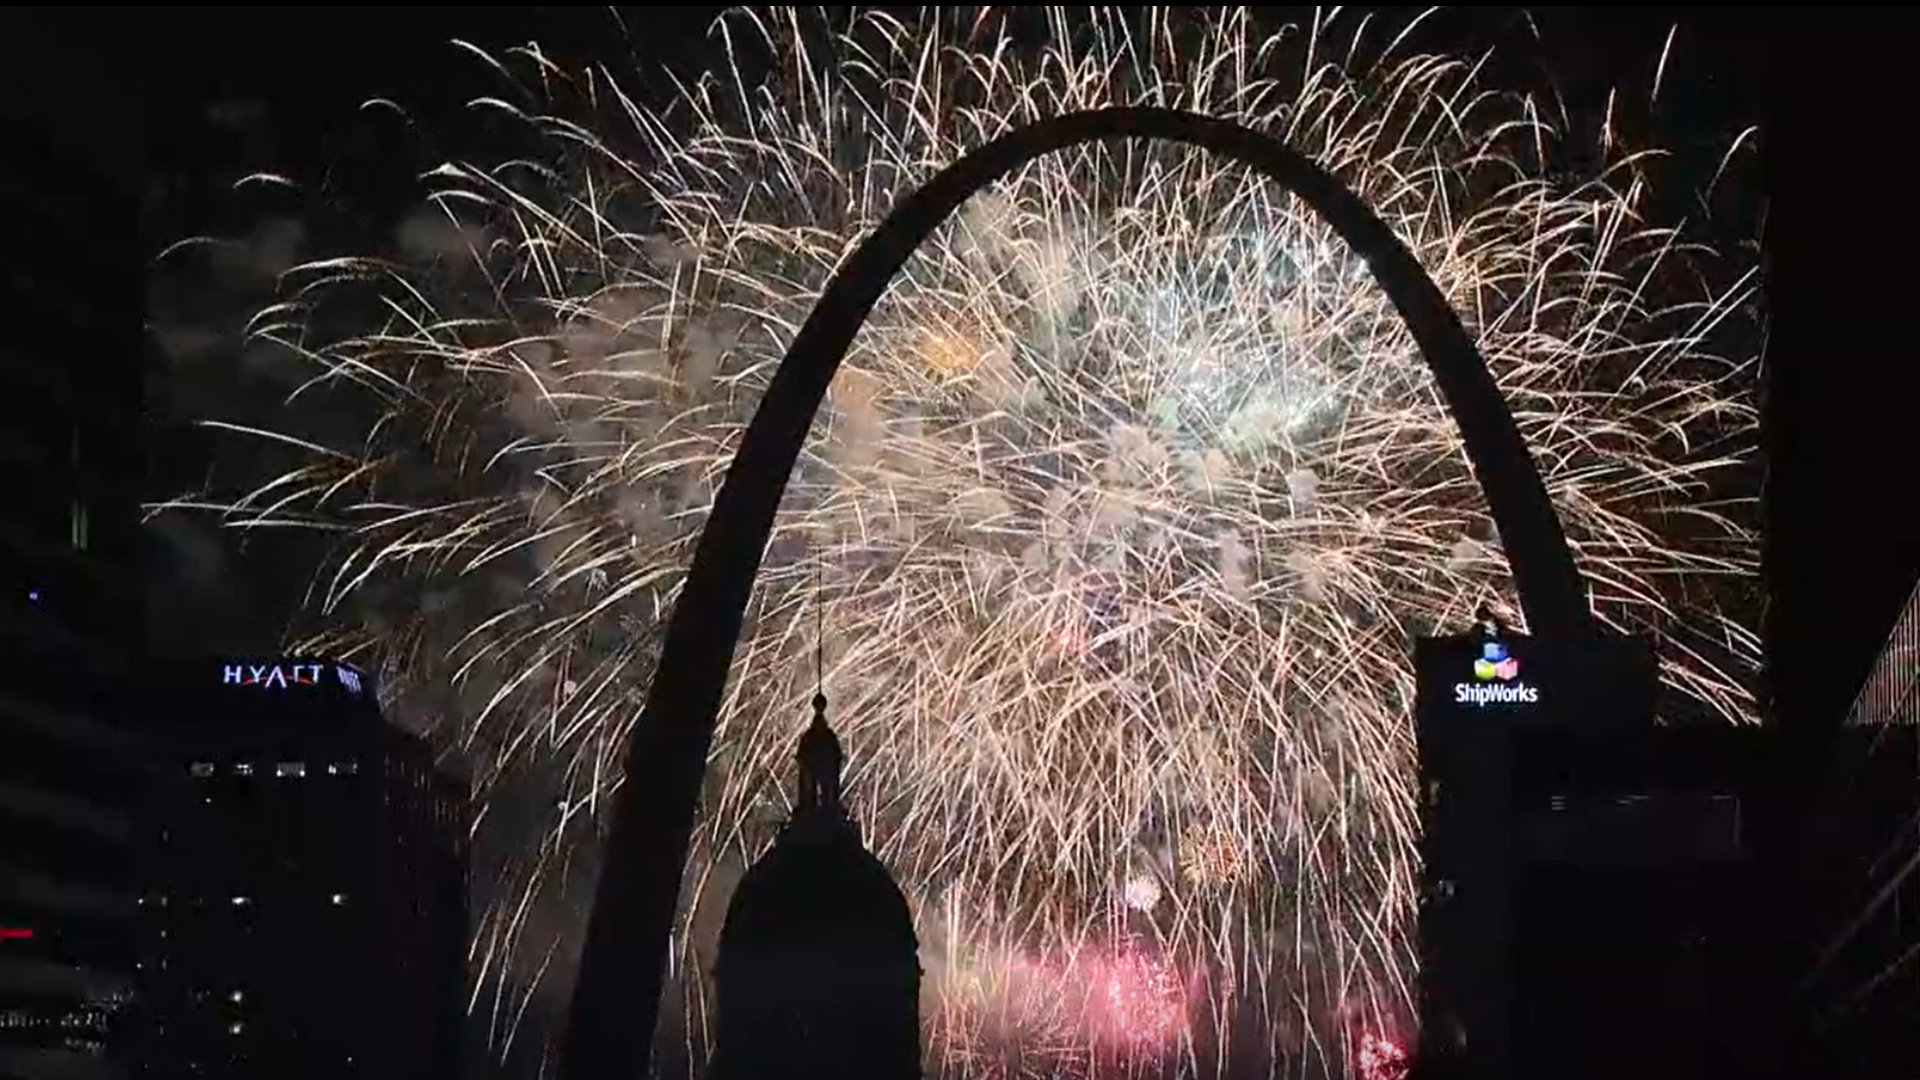 Fair St. Louis organizers said the 2021 display would be the biggest yet. Here's a look at the full fireworks show, edited together from 5 On Your Side's cameras.